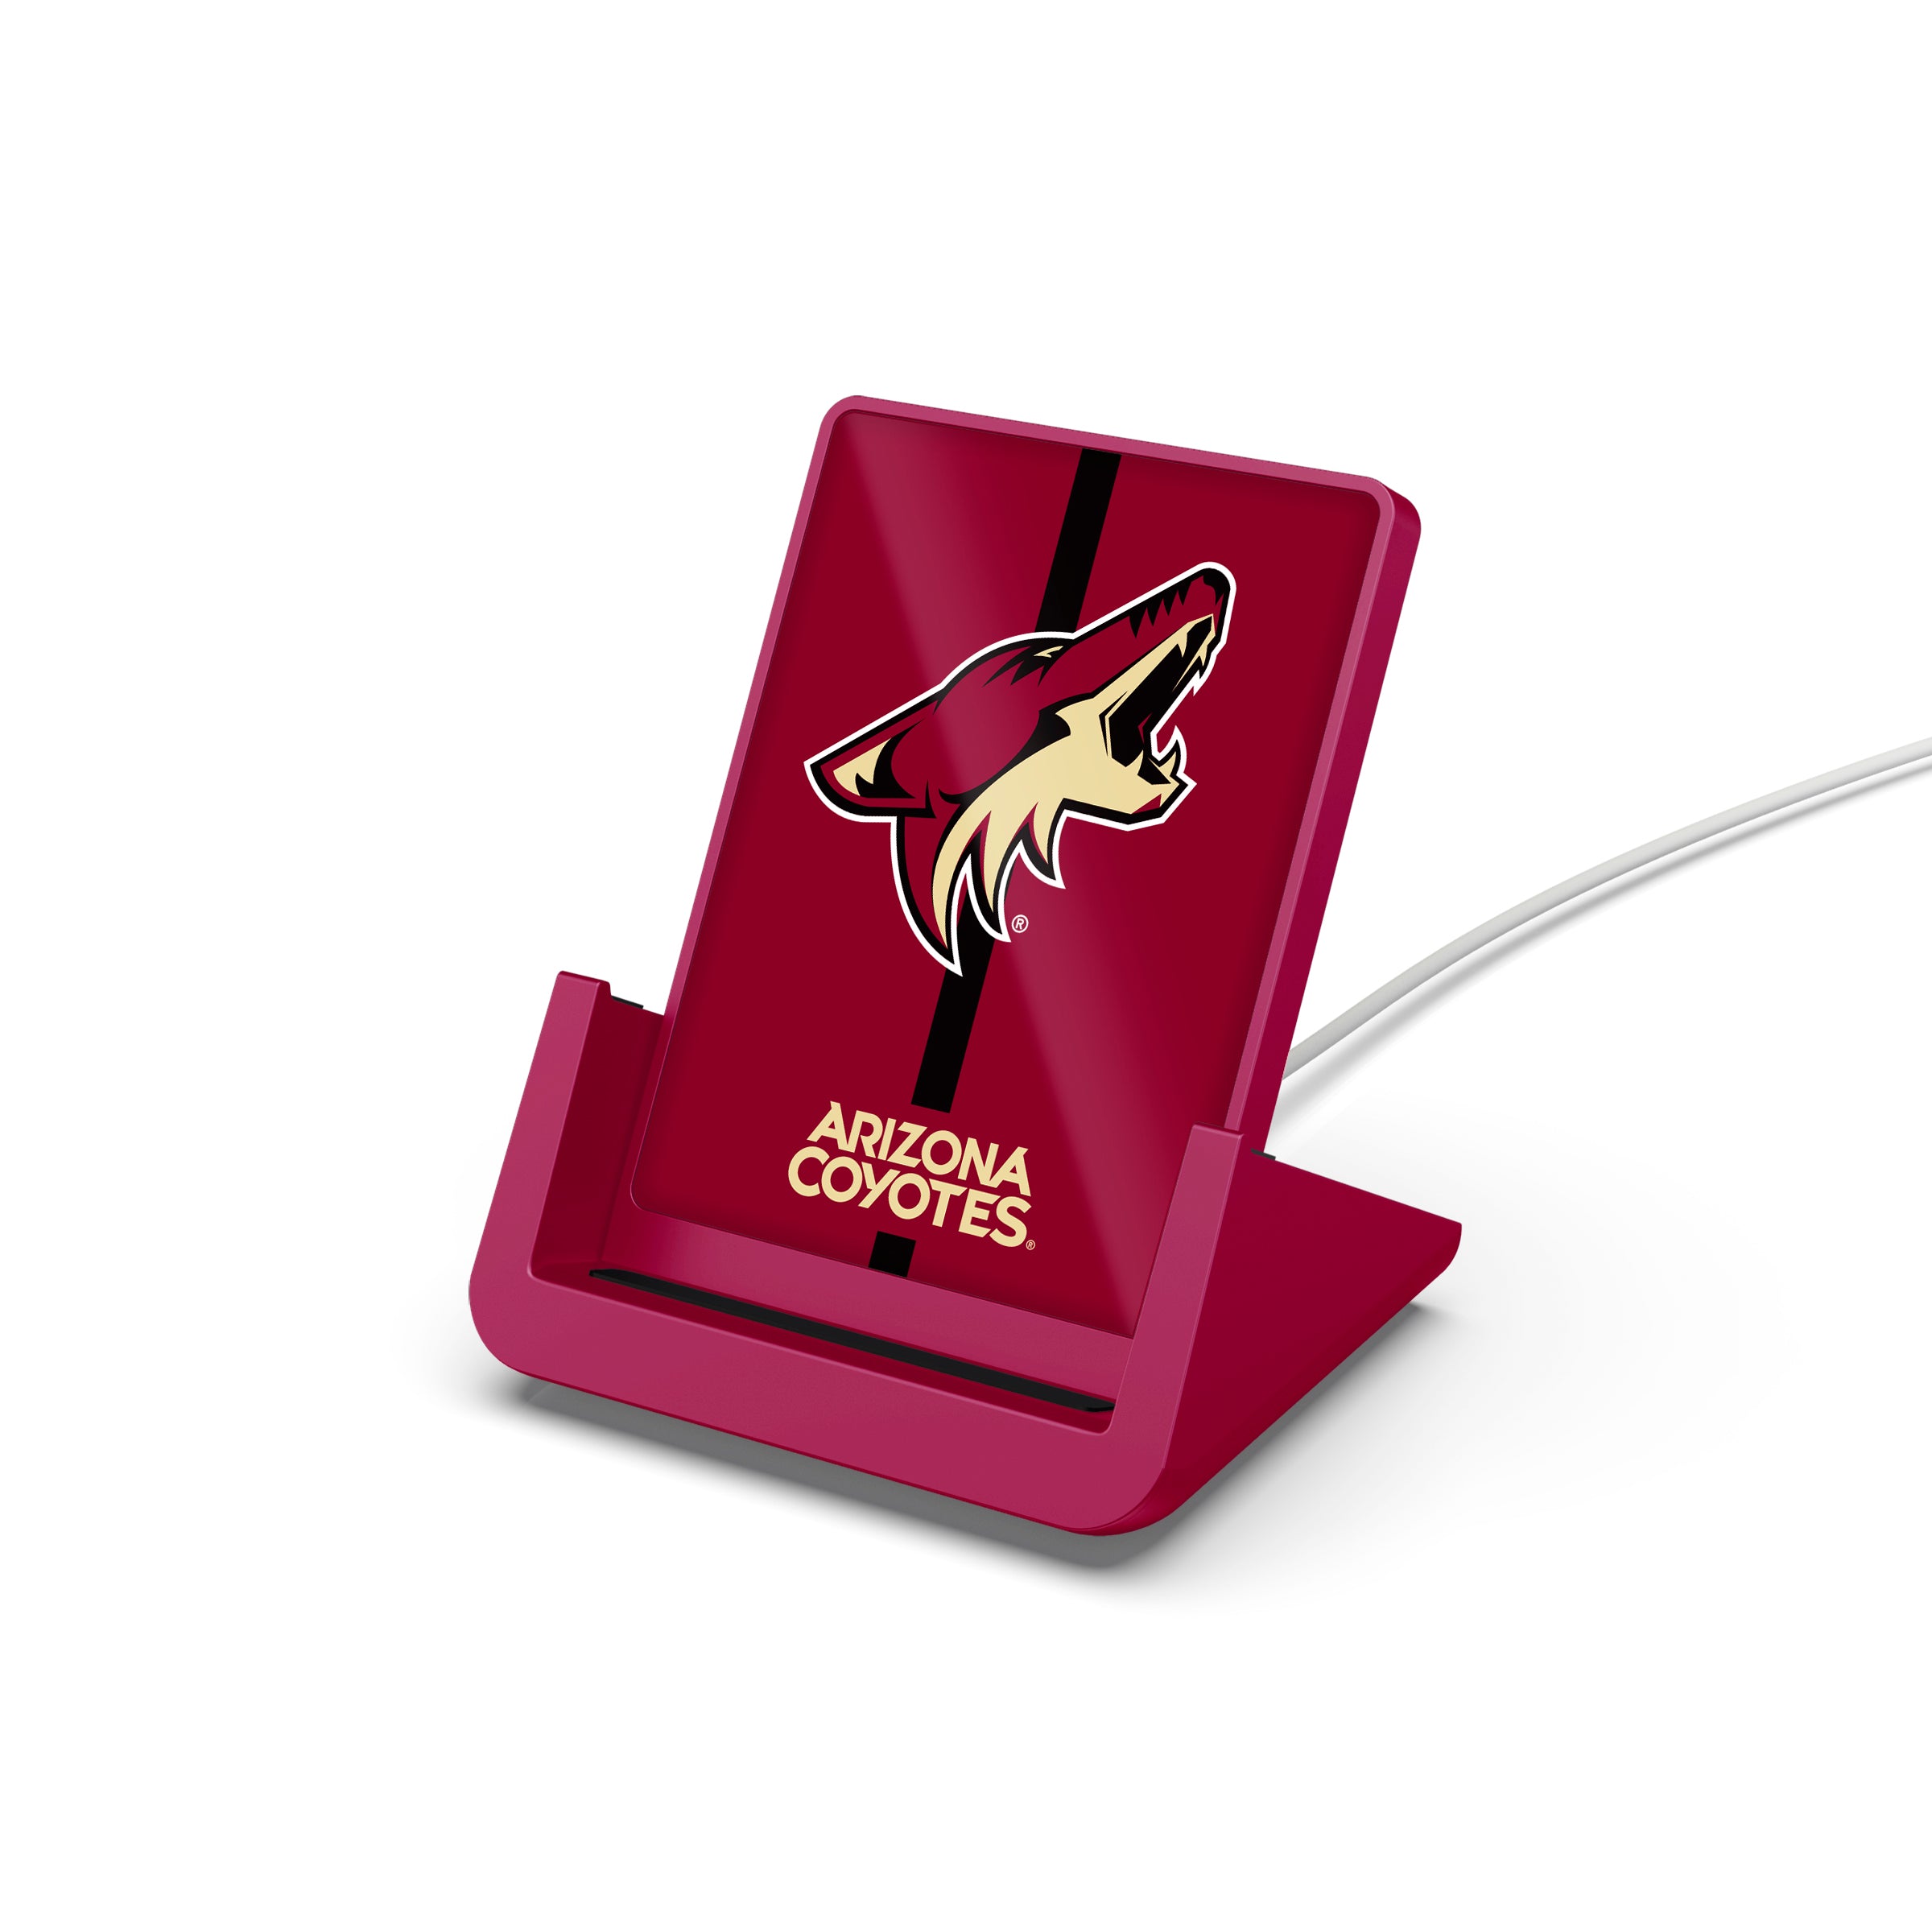 NHL Wireless Charging Stand